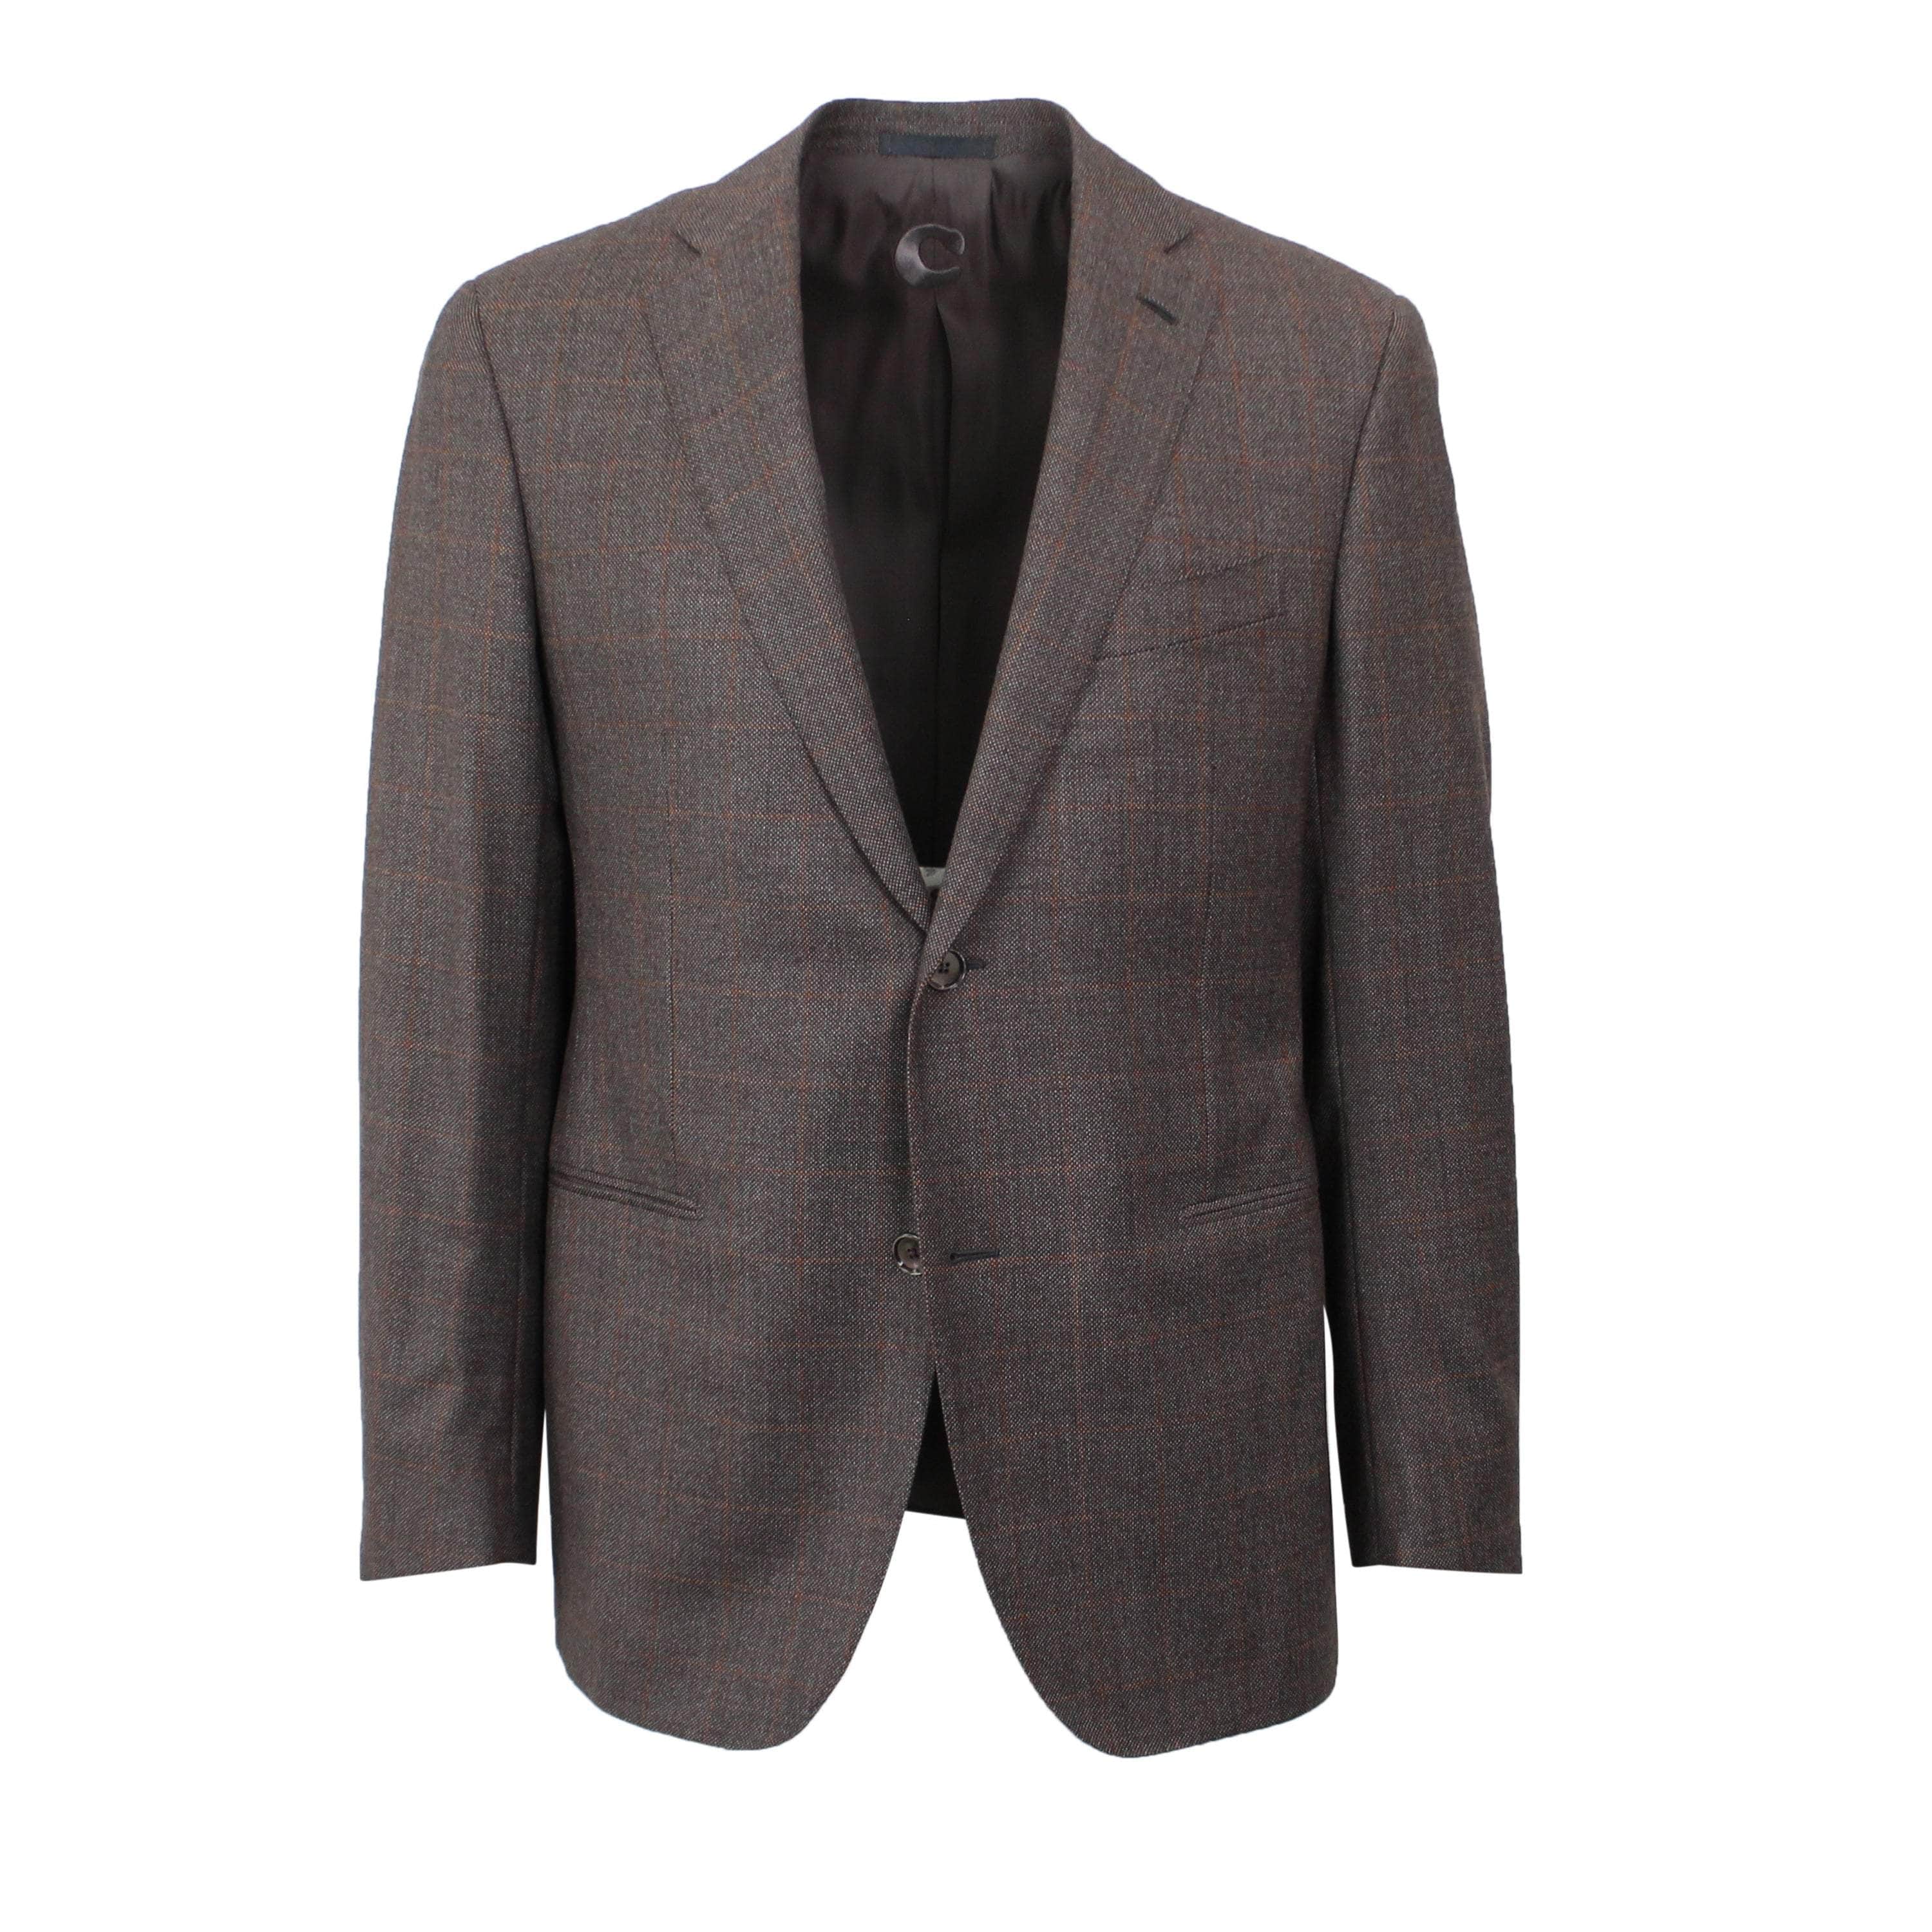 Caruso 500-750, caruso, channelenable-all, chicmi, couponcollection, main-clothing, shop375, size-50, Stadium Goods, stadiumgoods 50 Brown/Orange Single Breasted Wool Plaid Suit 7R CRS-XTPS-0172/50 CRS-XTPS-0172/50